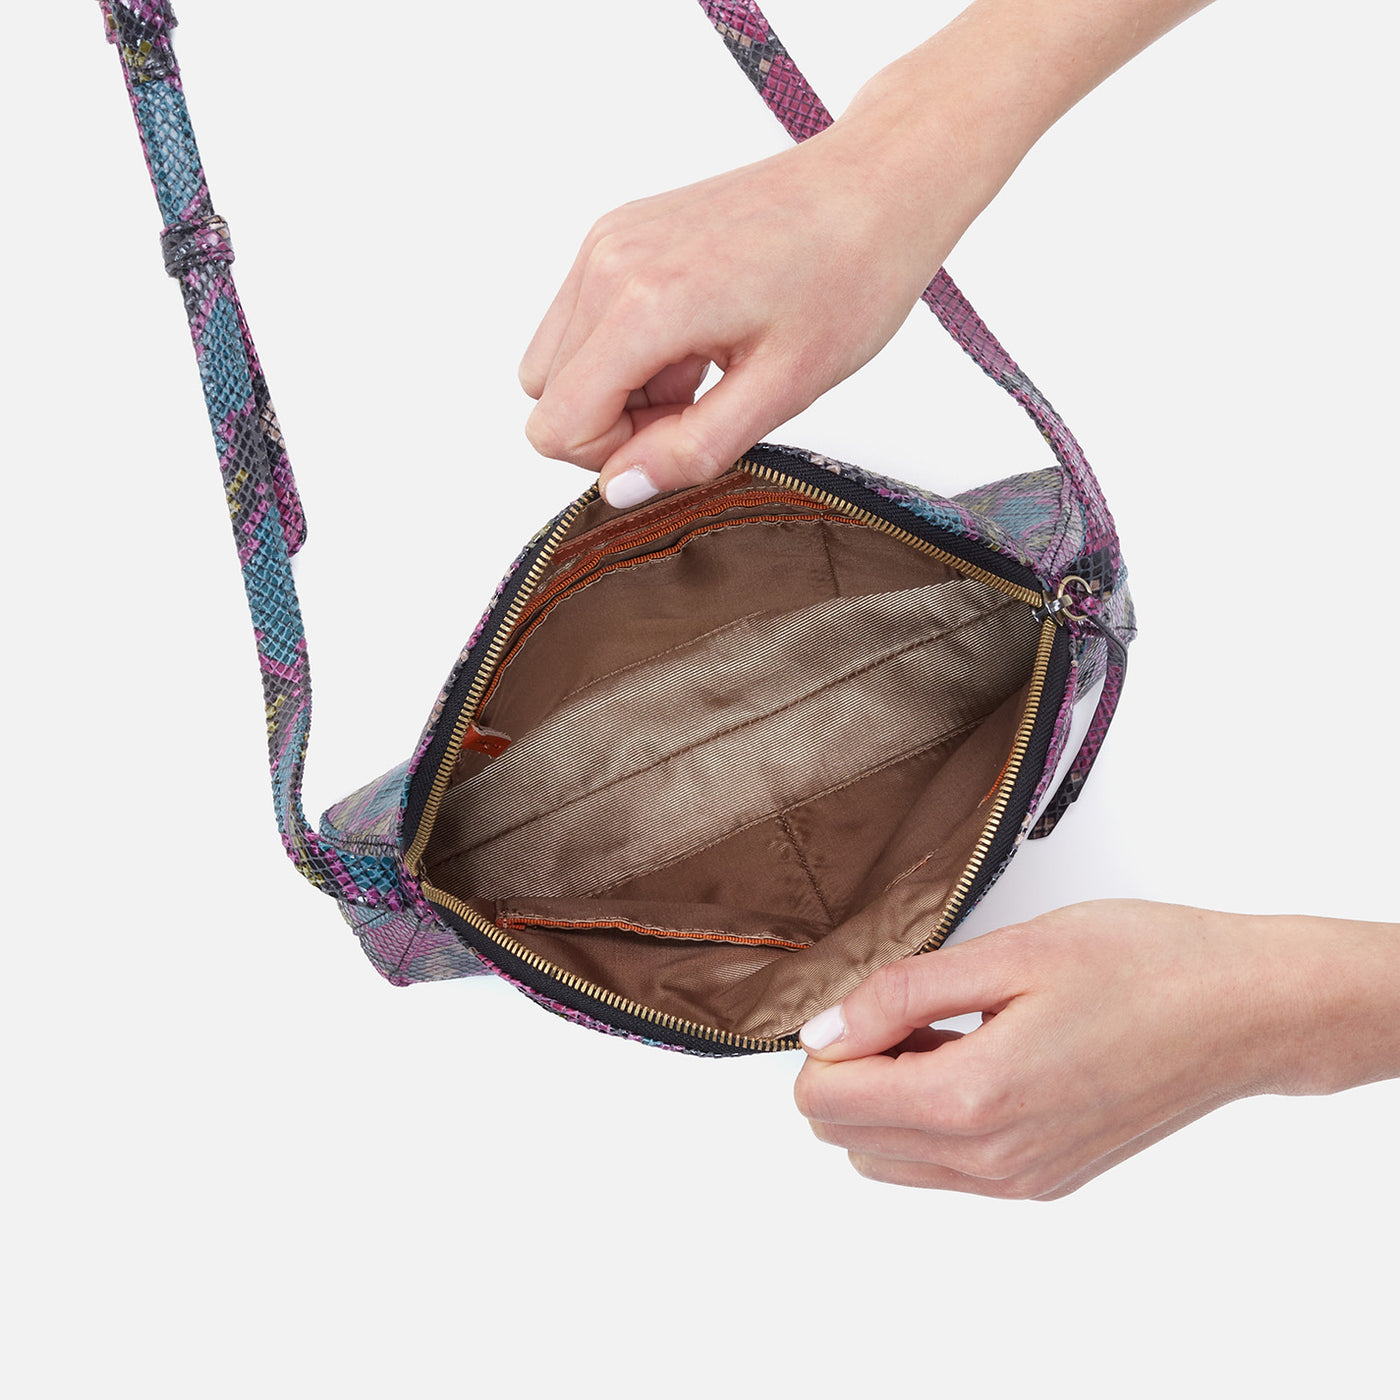 Beckett Crossbody In Printed Leather